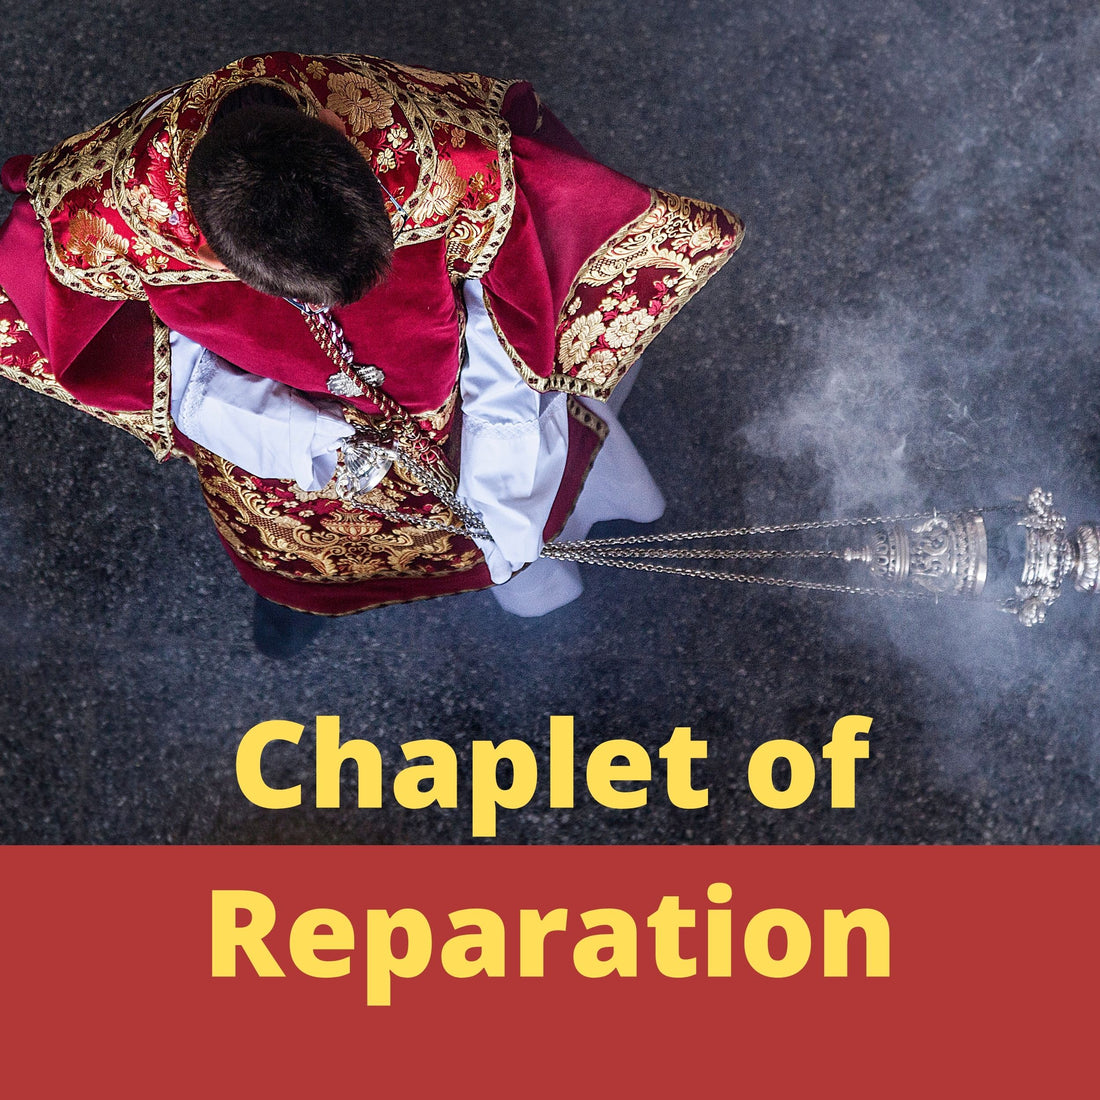 The Chaplet of Reparation